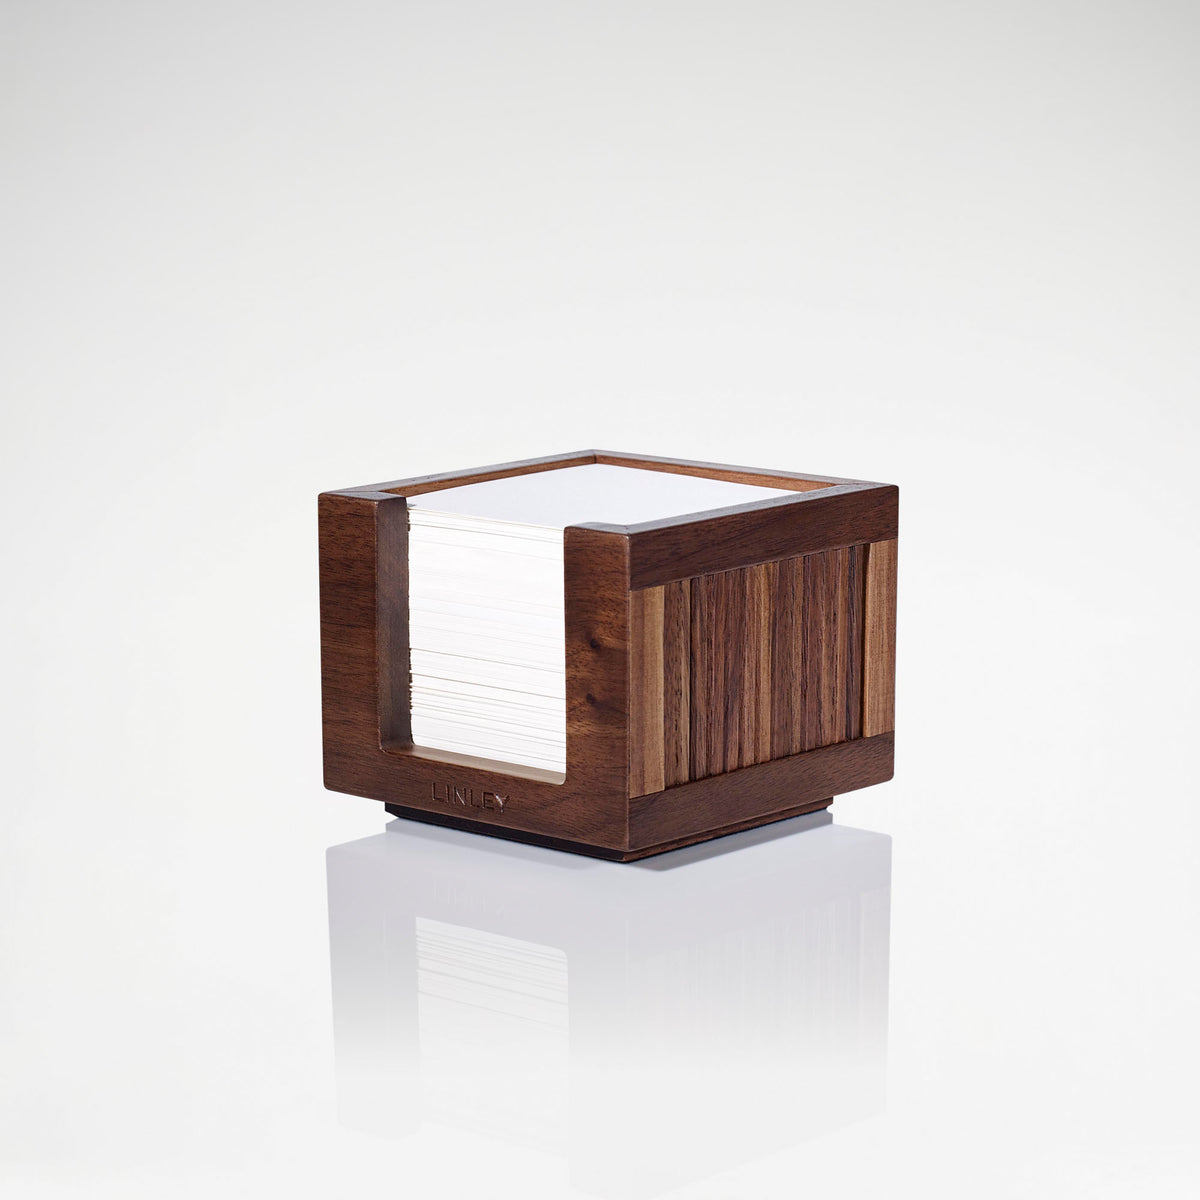 Tambour Noteholder | Luxury Home Accessories & Gifts | LINLEY